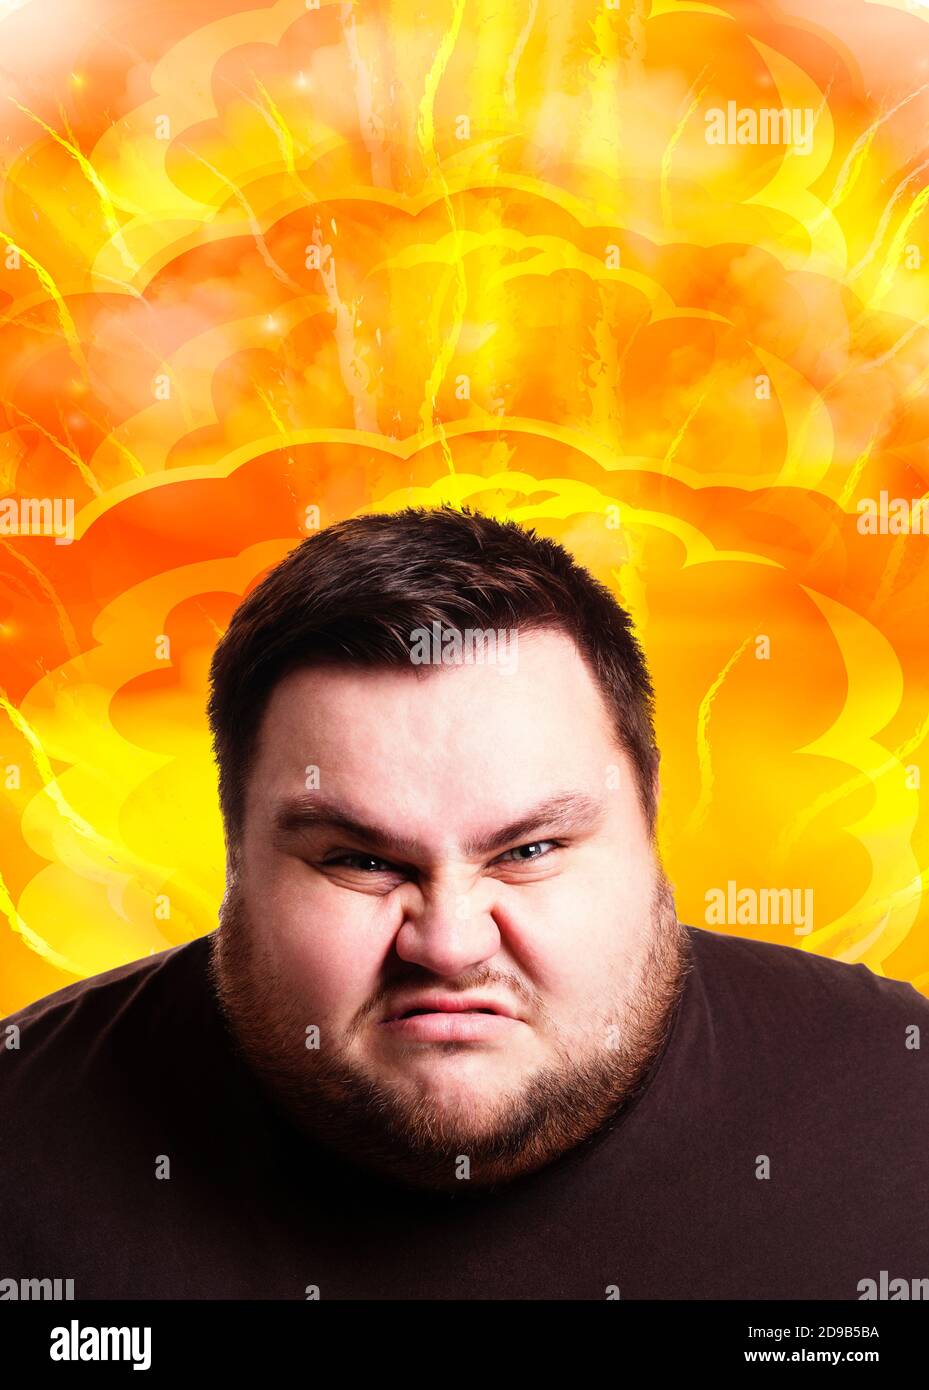 Angry fat guy having his mind explode from fatigue or work overload, collage Stock Photo